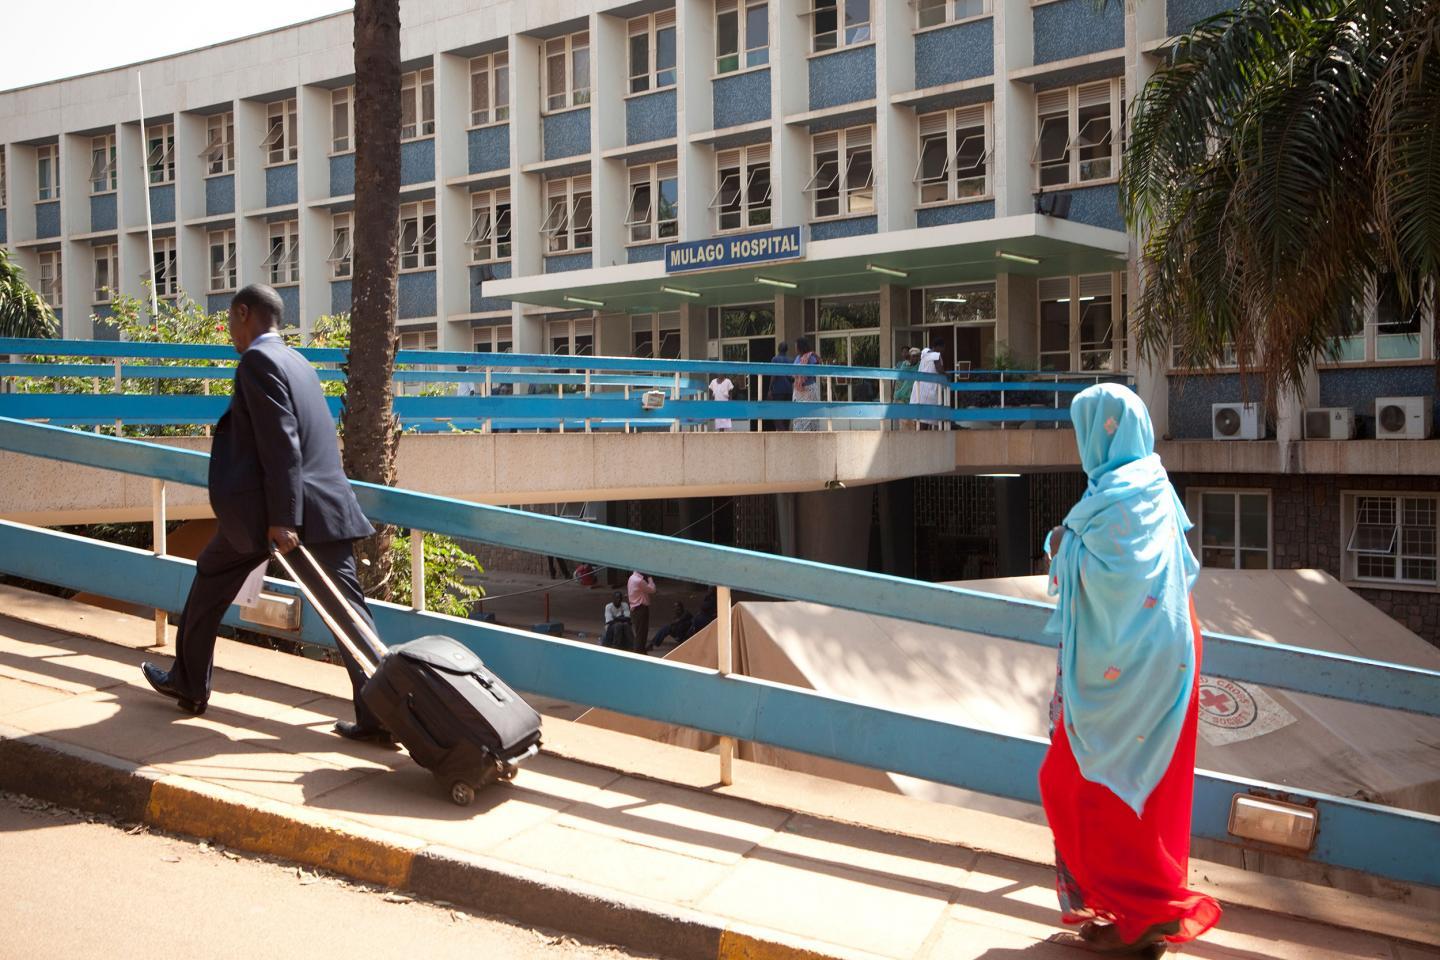 People walk past Mulago Hospital in Kampala, Uganda. At Mulago, patients in a research trial receive CrAg LFA, a screening that can detect the presence of cryptococcal meningitis, enabling the lethal disease to be cured before symptoms arise.